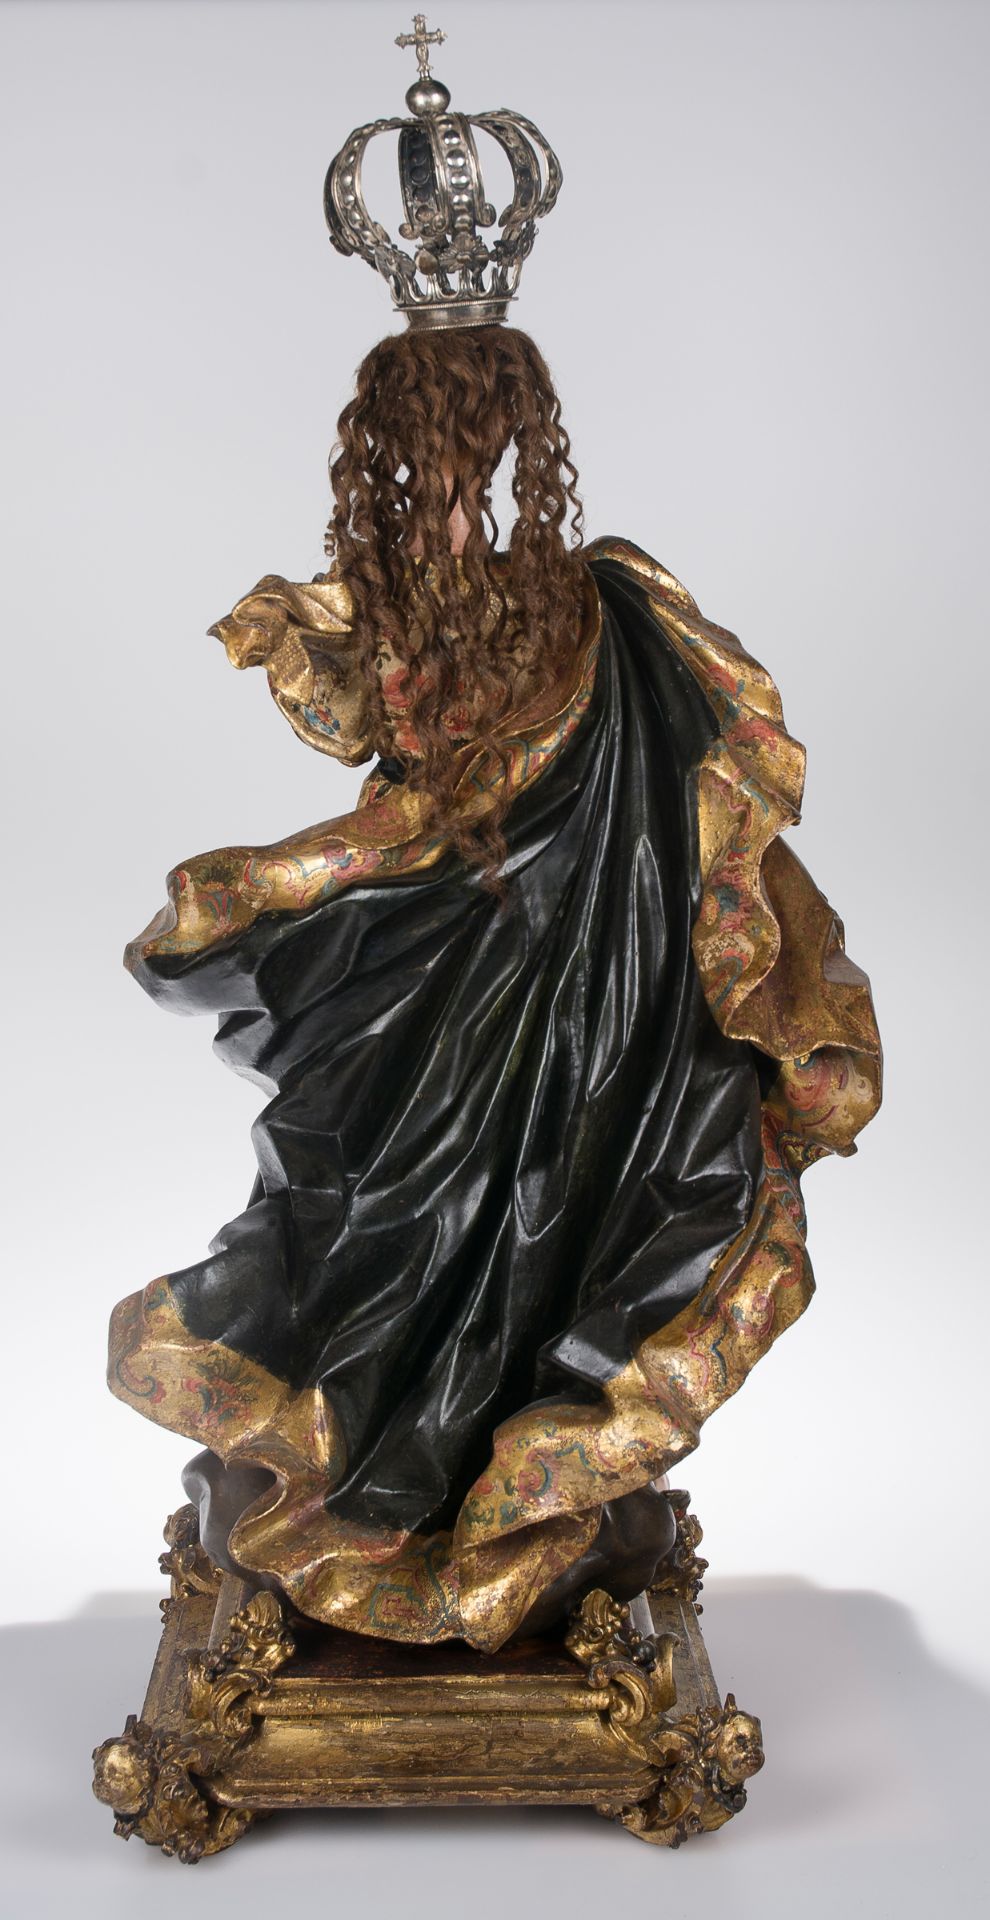 "Our Lady Immaculate". Carved, gilded, estofado technique and polychromed wooden sculpture. Colon - Image 11 of 21